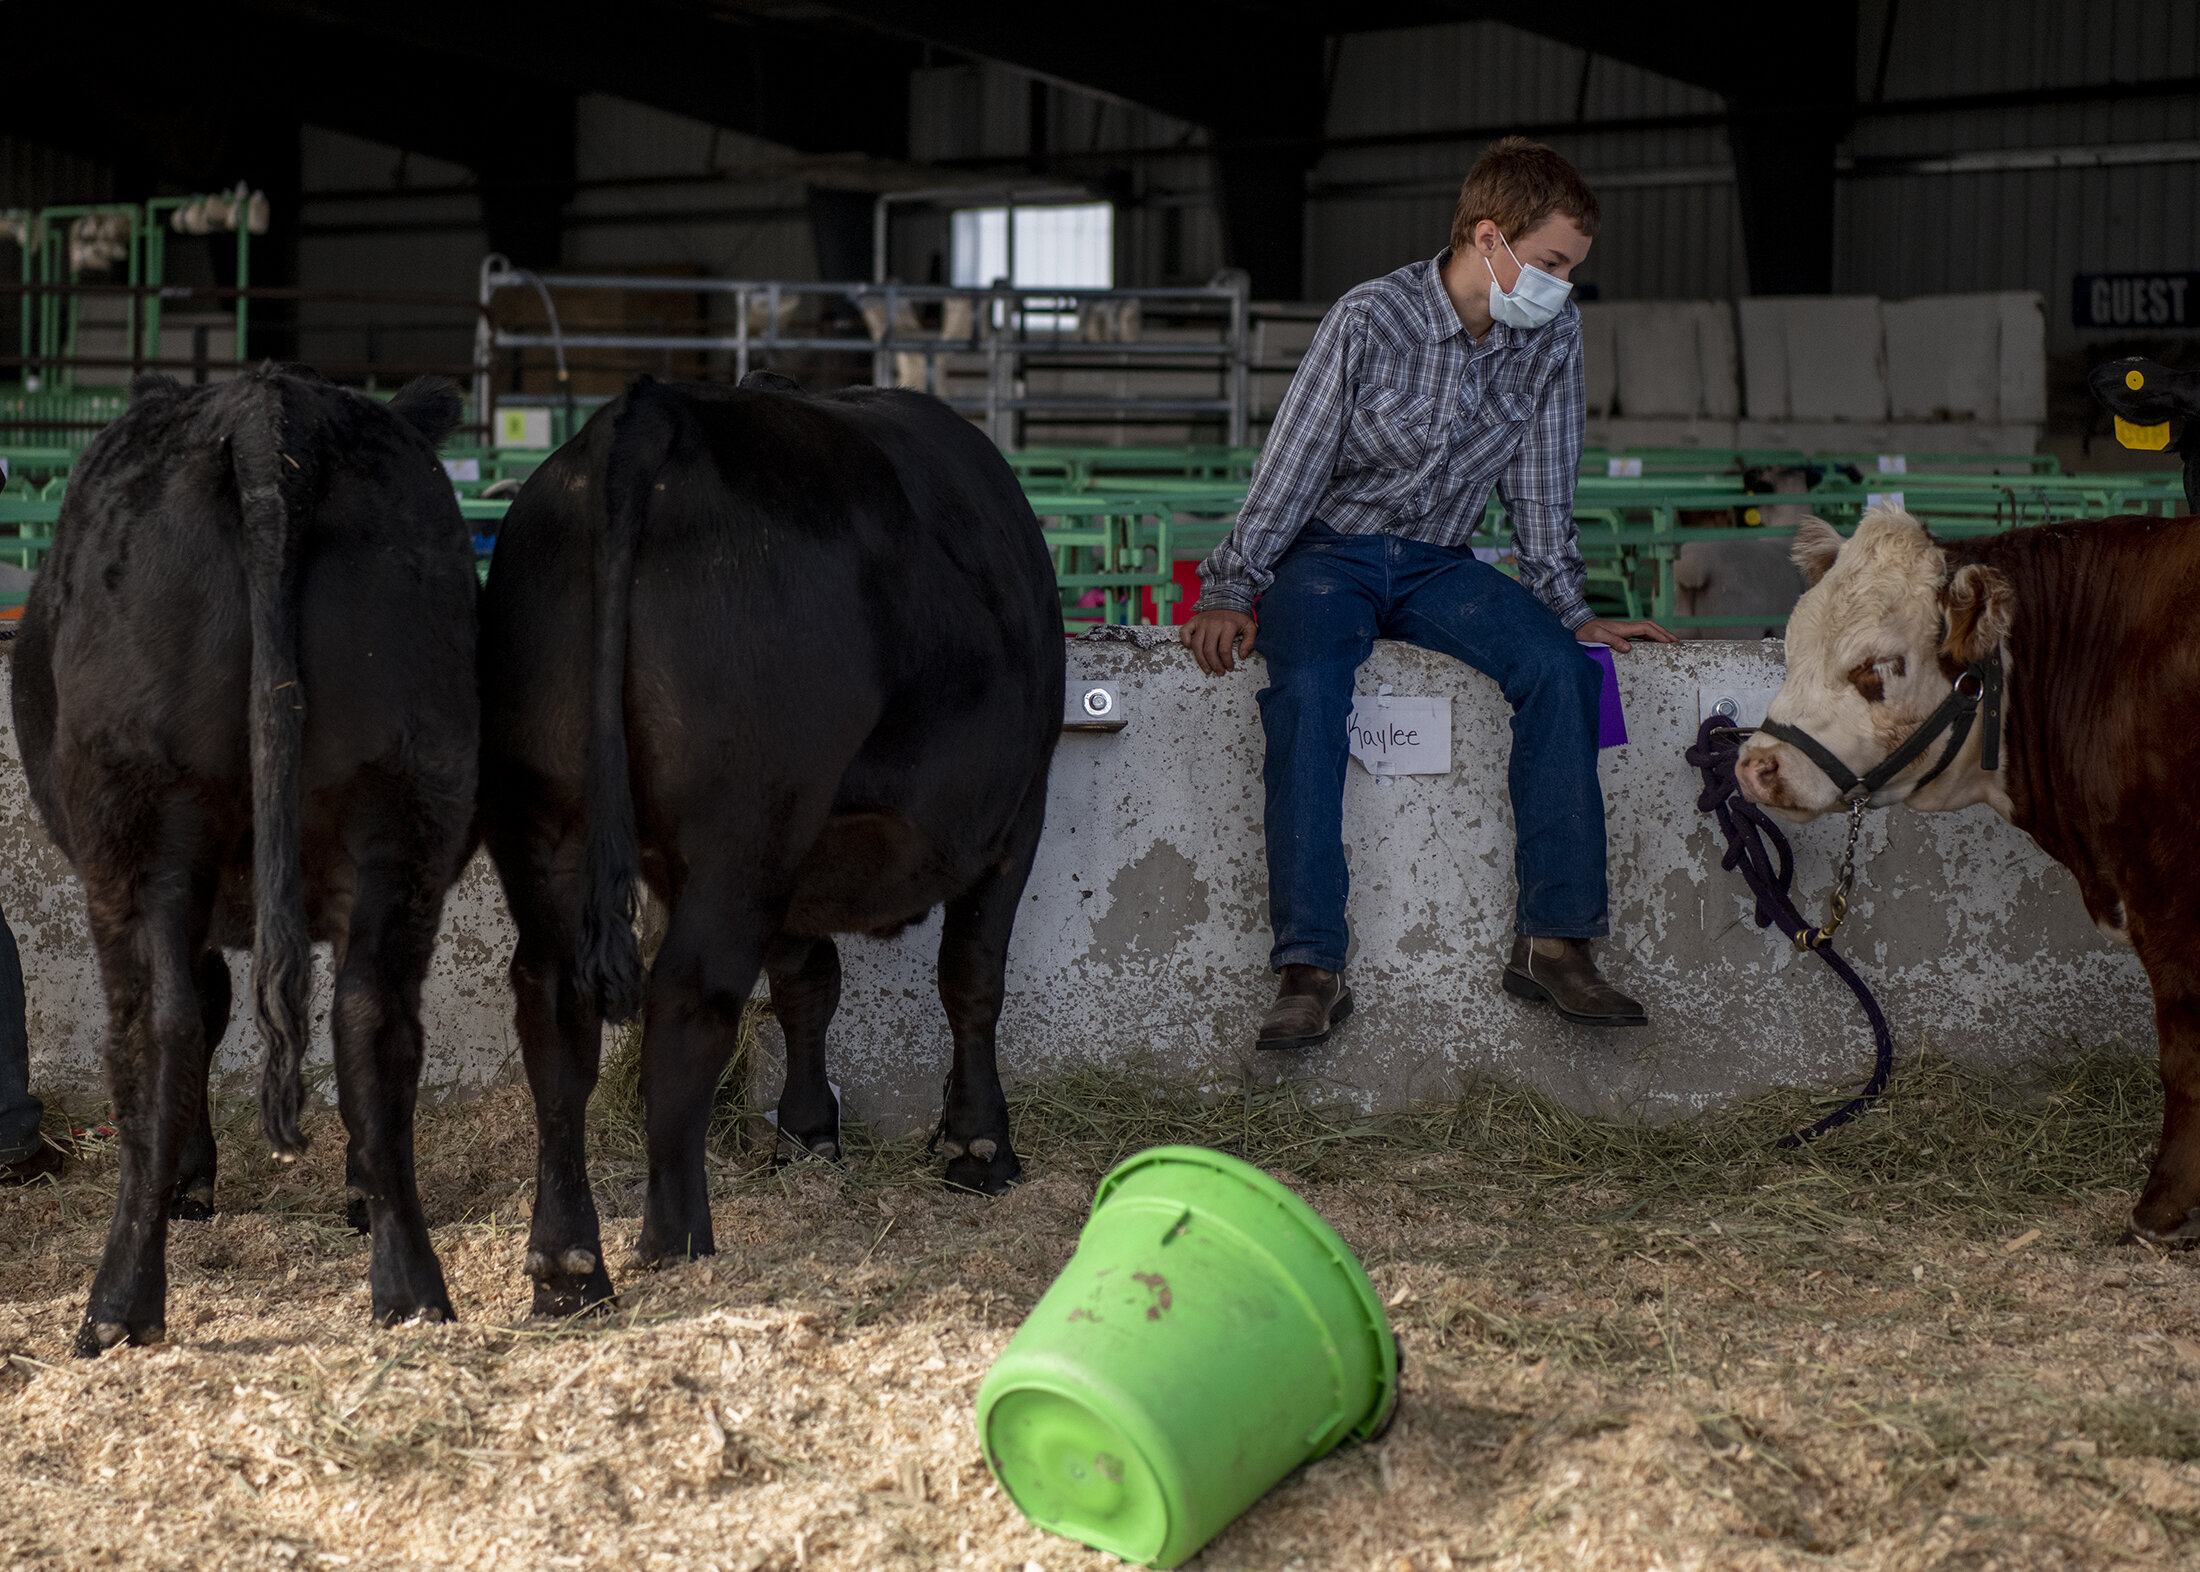  Brody Smith of Arlee sits on a concrete barrier following the Western Montana 4-H/FFA livestock sale at the Missoula County Fairgrounds, Aug. 8, 2020 in Missoula, Mont.  